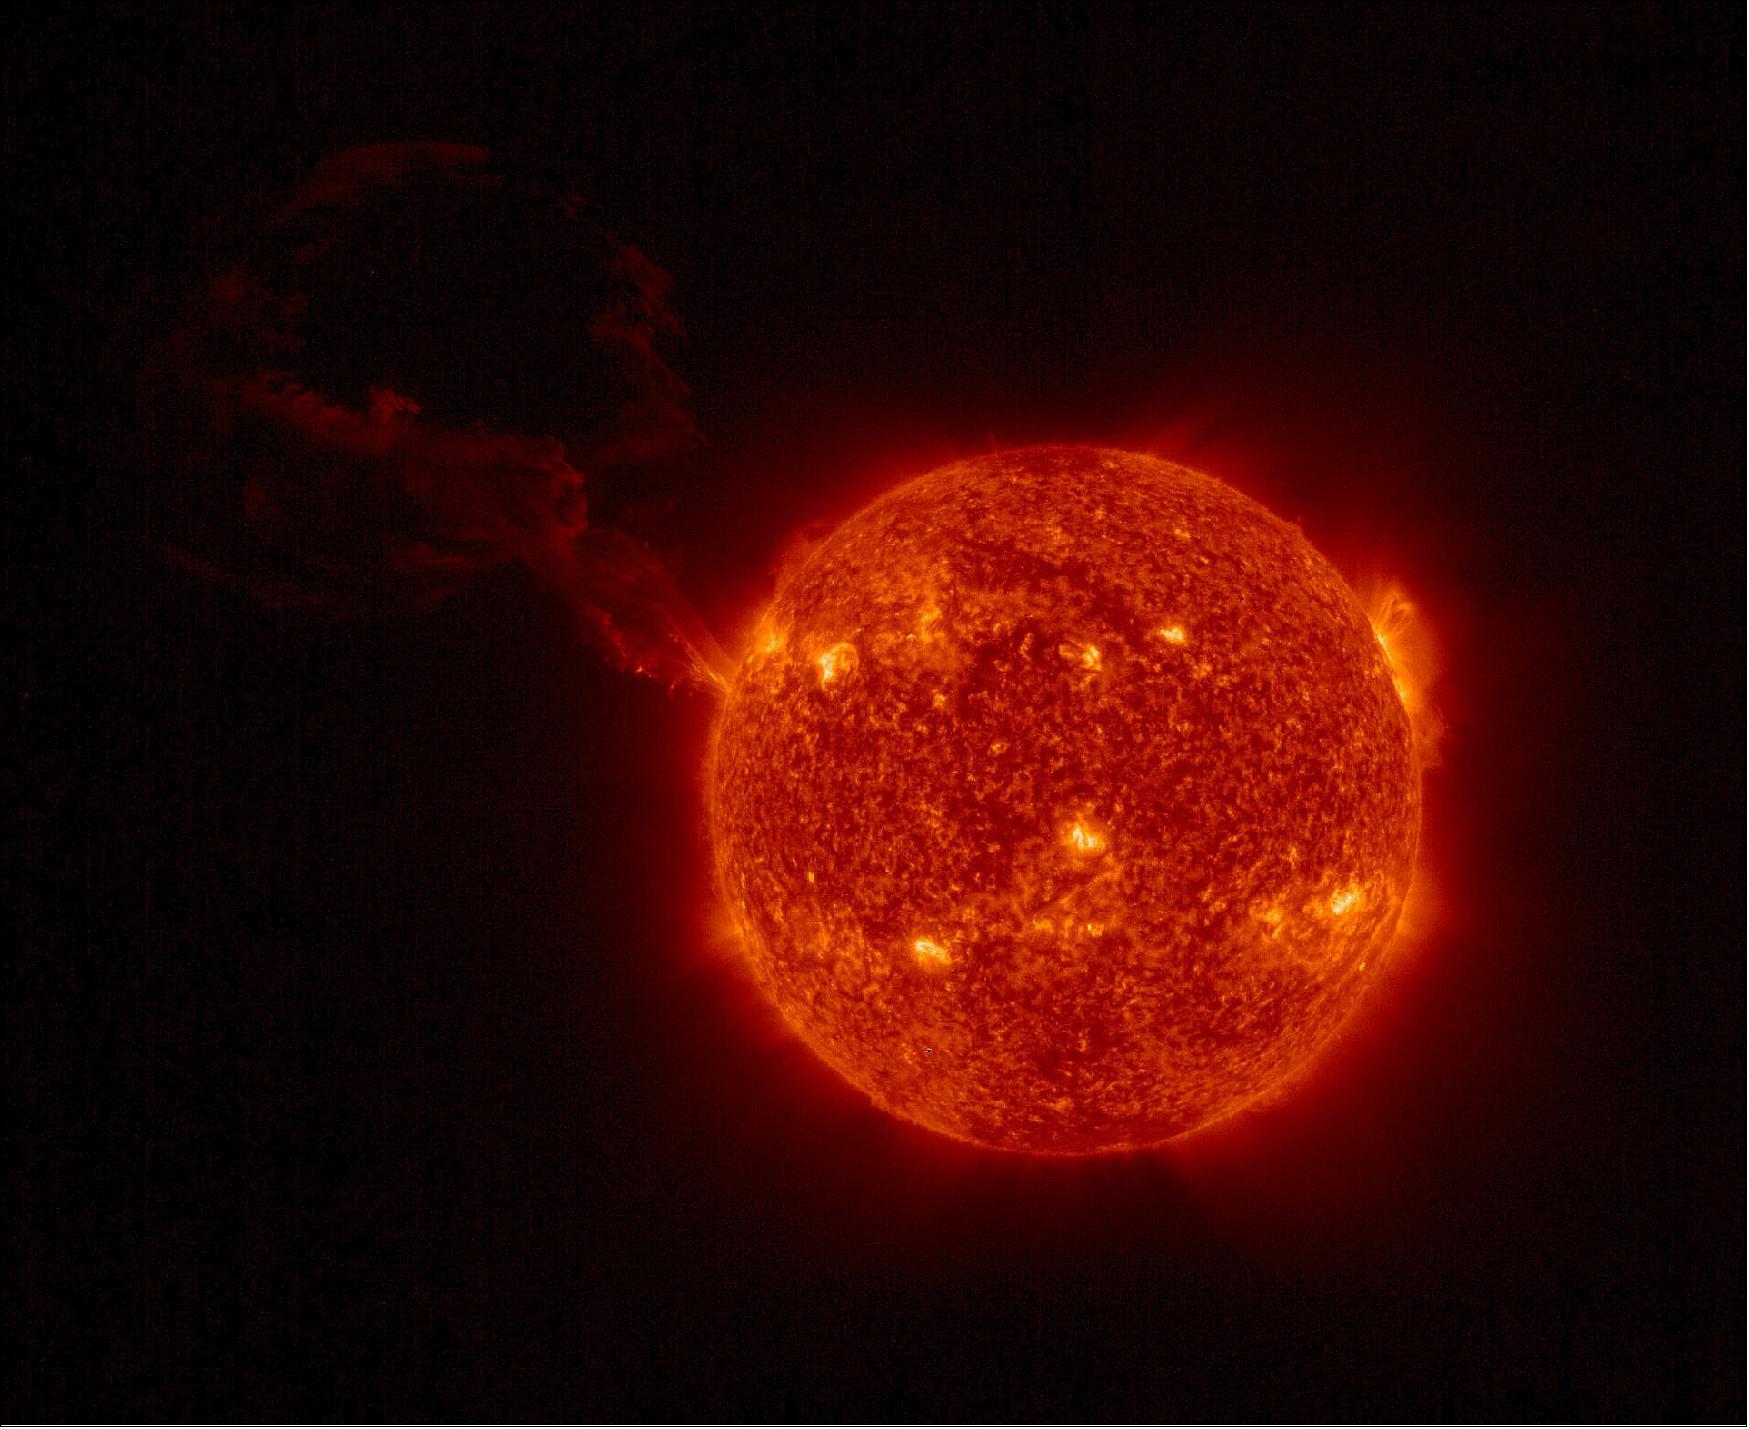 Figure 28: The Full Sun Imager of the Extreme Ultraviolet Imager on board the ESA/NASA Solar Orbiter spacecraft captured a giant solar eruption on 15 February 2022. This is the largest solar prominence eruption ever observed in a single image together with the full solar disc (image credit: Solar Orbiter/EUI Team/ESA & NASA)